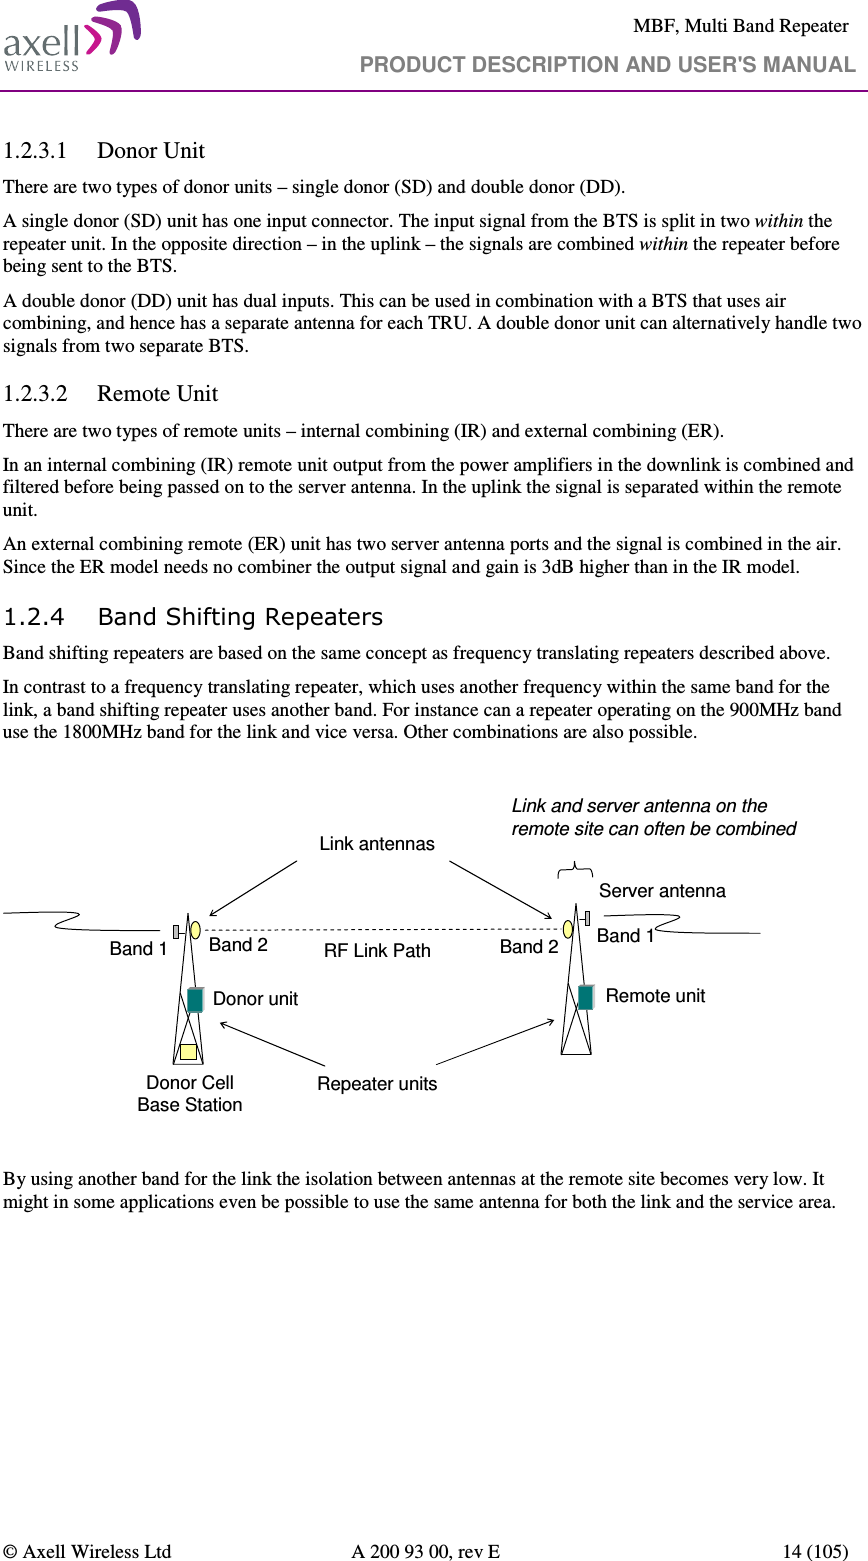     MBF, Multi Band Repeater                                     PRODUCT DESCRIPTION AND USER&apos;S MANUAL   © Axell Wireless Ltd  A 200 93 00, rev E  14 (105)  1.2.3.1 Donor Unit There are two types of donor units – single donor (SD) and double donor (DD).  A single donor (SD) unit has one input connector. The input signal from the BTS is split in two within the repeater unit. In the opposite direction – in the uplink – the signals are combined within the repeater before being sent to the BTS. A double donor (DD) unit has dual inputs. This can be used in combination with a BTS that uses air combining, and hence has a separate antenna for each TRU. A double donor unit can alternatively handle two signals from two separate BTS. 1.2.3.2 Remote Unit There are two types of remote units – internal combining (IR) and external combining (ER). In an internal combining (IR) remote unit output from the power amplifiers in the downlink is combined and filtered before being passed on to the server antenna. In the uplink the signal is separated within the remote unit. An external combining remote (ER) unit has two server antenna ports and the signal is combined in the air. Since the ER model needs no combiner the output signal and gain is 3dB higher than in the IR model. 1.2.4 Band Shifting Repeaters Band shifting repeaters are based on the same concept as frequency translating repeaters described above.  In contrast to a frequency translating repeater, which uses another frequency within the same band for the link, a band shifting repeater uses another band. For instance can a repeater operating on the 900MHz band use the 1800MHz band for the link and vice versa. Other combinations are also possible.  Donor Cell Base StationRemote unitServer antennaBand 2 Band 2 Band 1Donor unitRF Link PathBand 1Link antennasRepeater unitsLink and server antenna on the remote site can often be combined  By using another band for the link the isolation between antennas at the remote site becomes very low. It might in some applications even be possible to use the same antenna for both the link and the service area. 